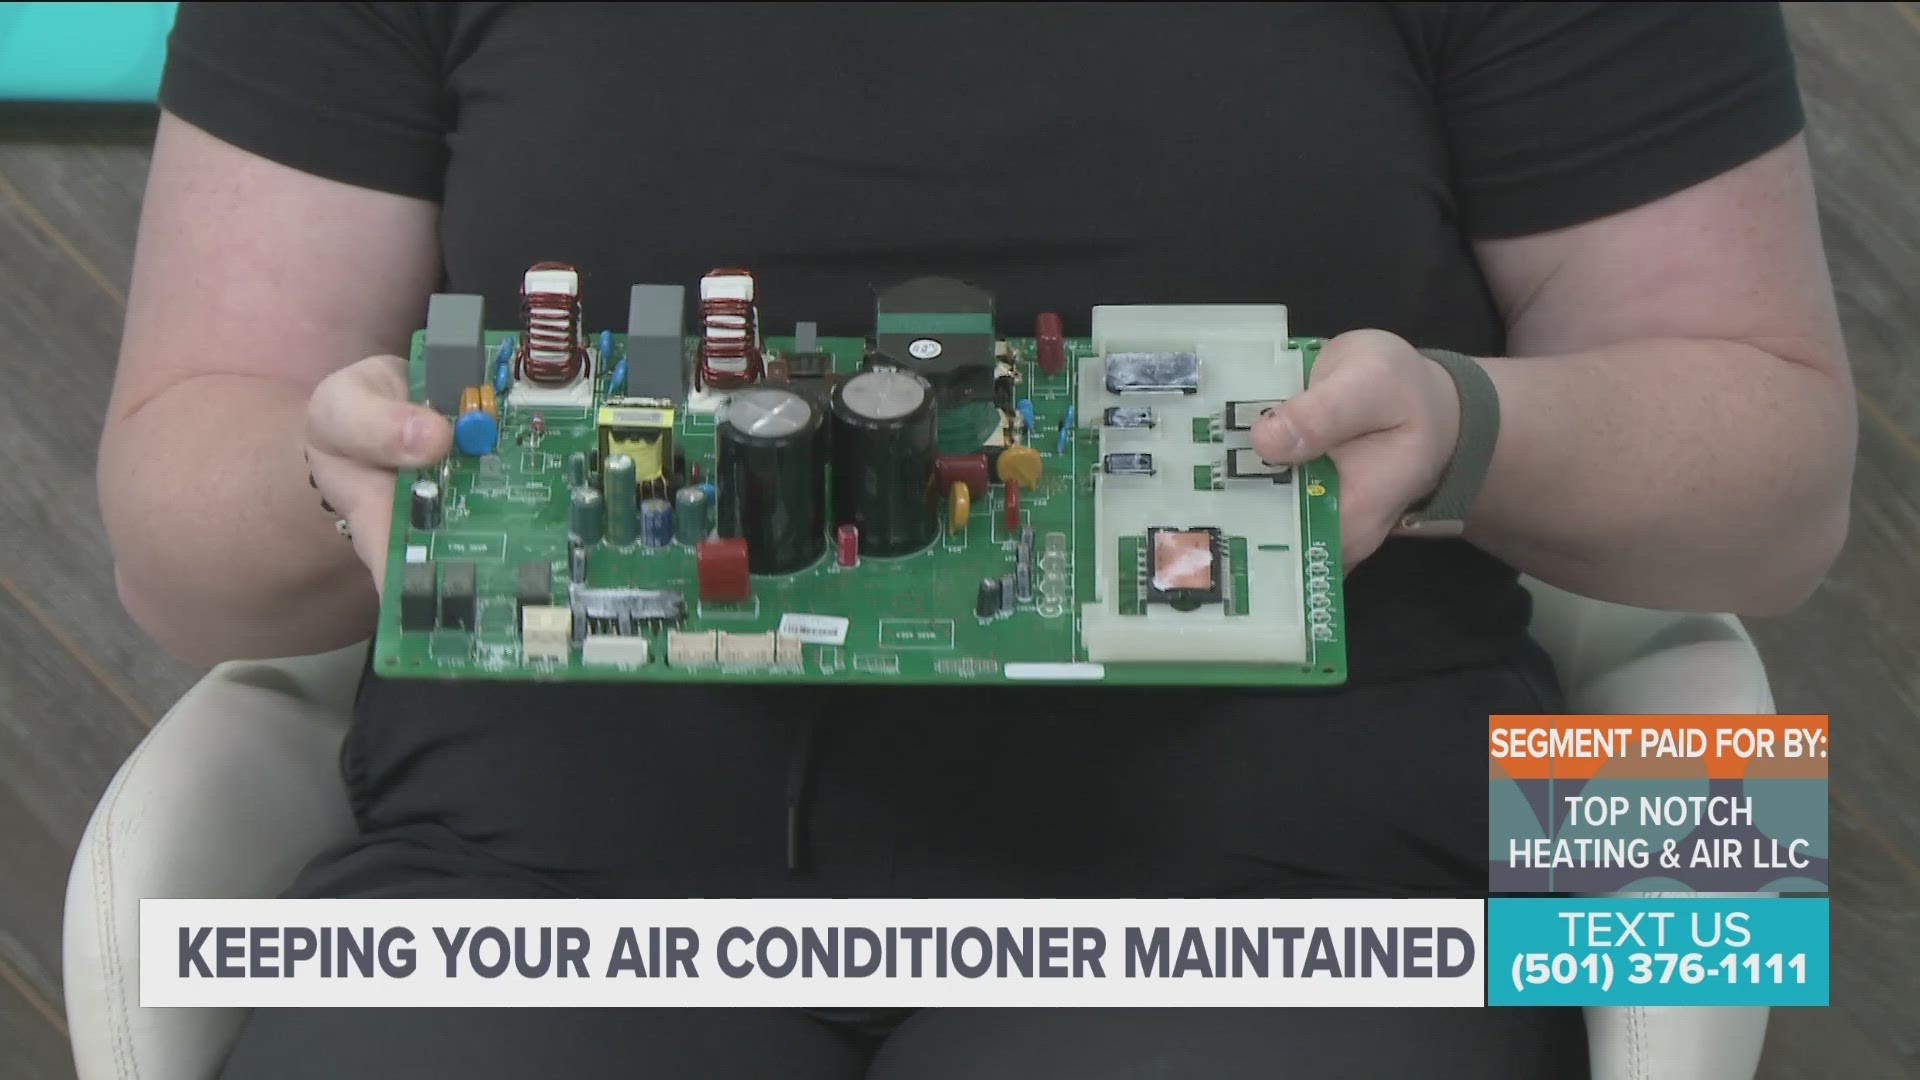 Sara Long with Top Notch Heating & Air LLC tells us about keeping your unit maintained during the summer heat.